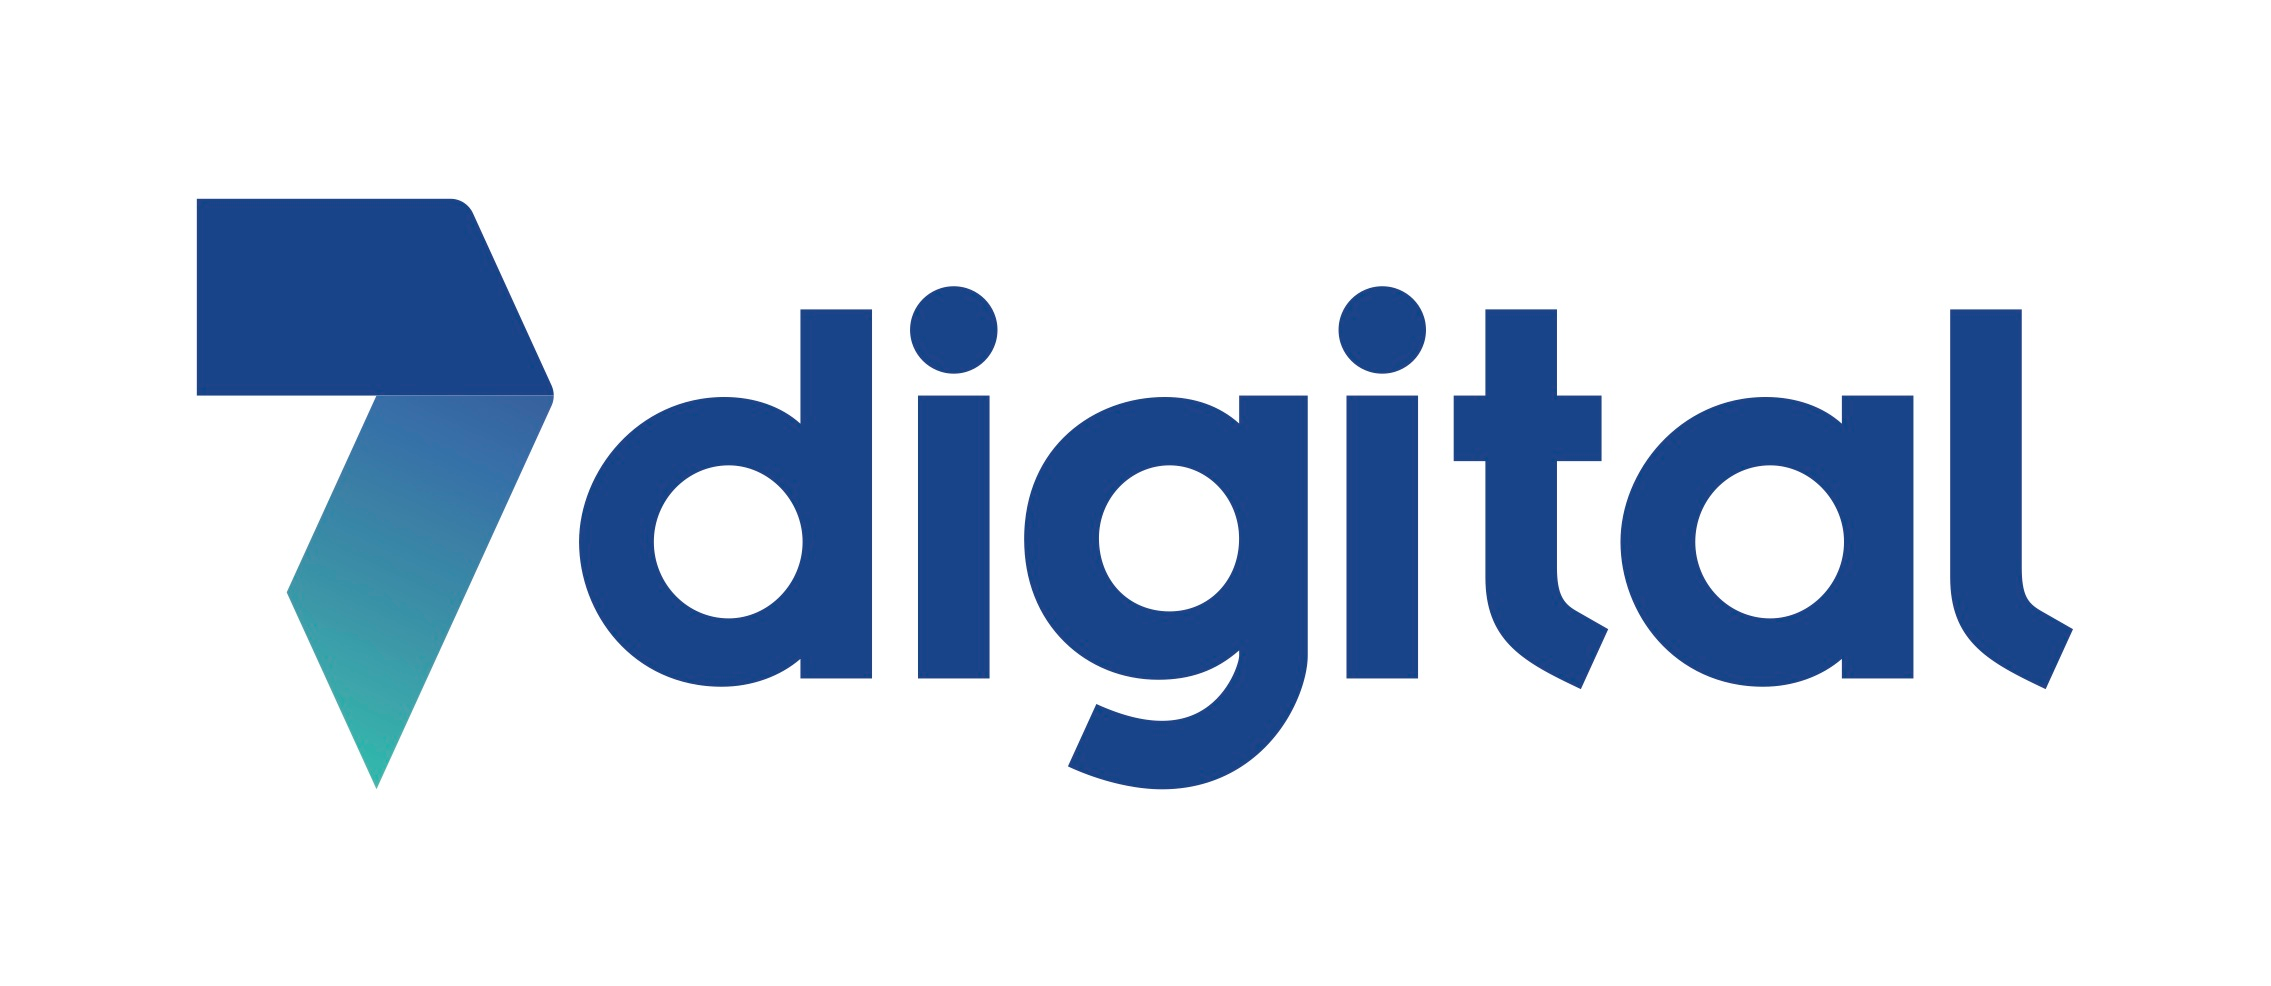 7digital needs £4.5 million before next month or faces administration